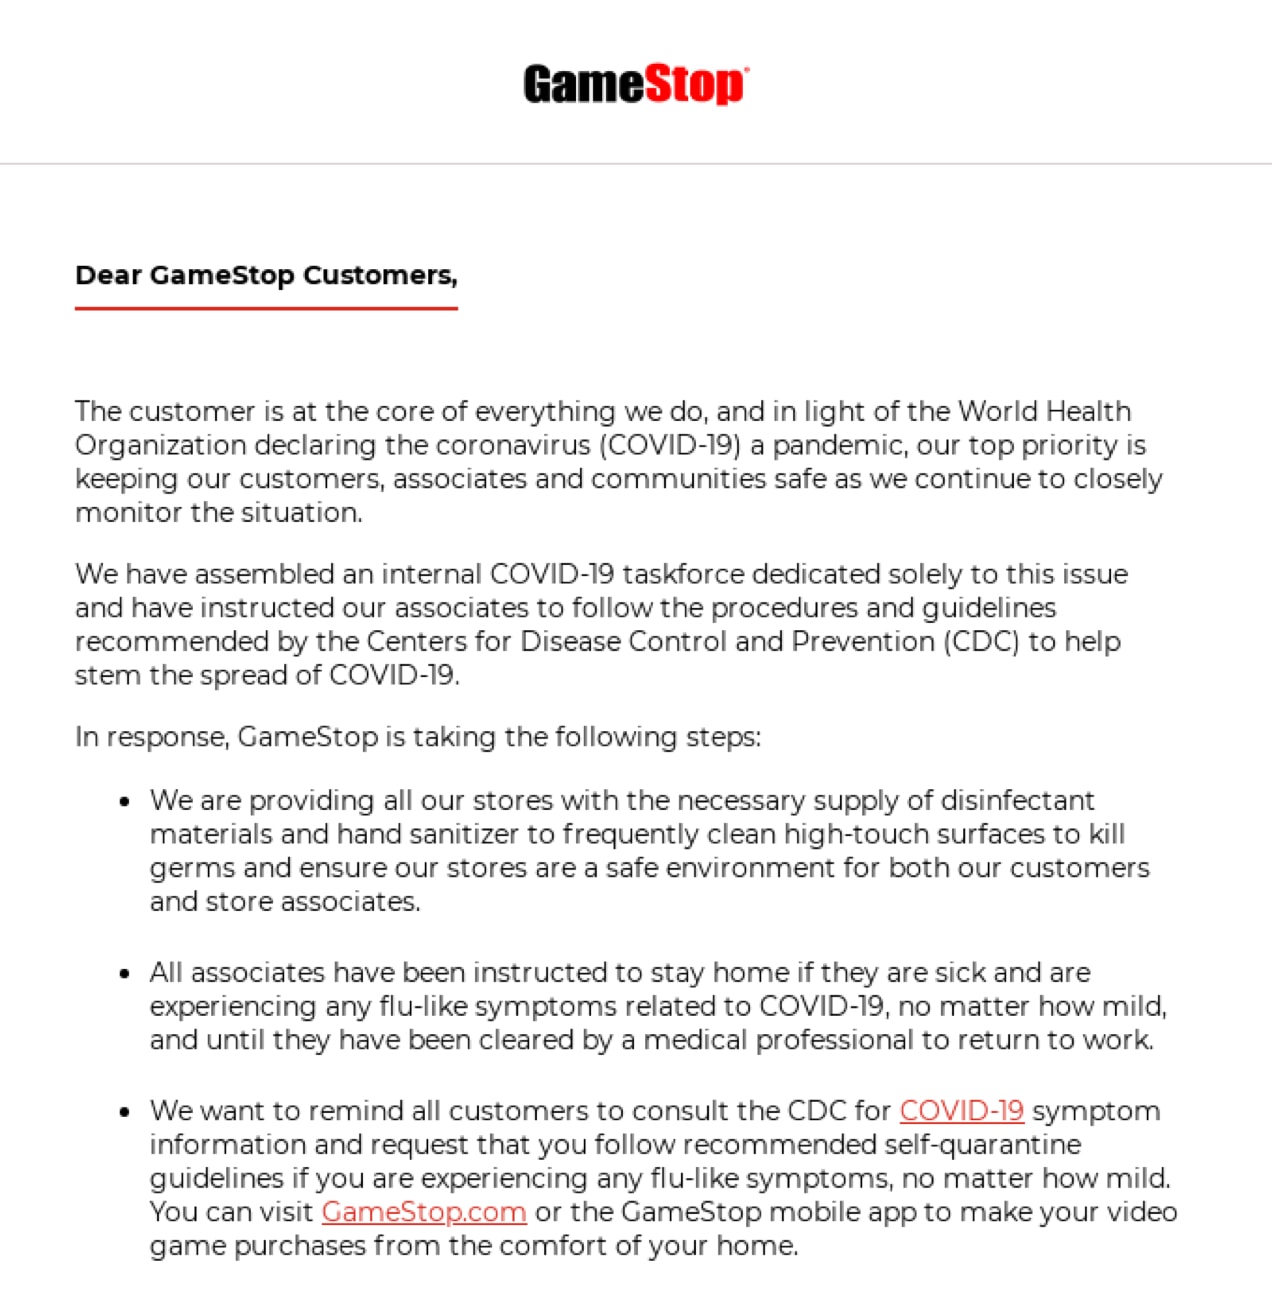 a text-based email from GameStop addressing the COVID-19 pandemic